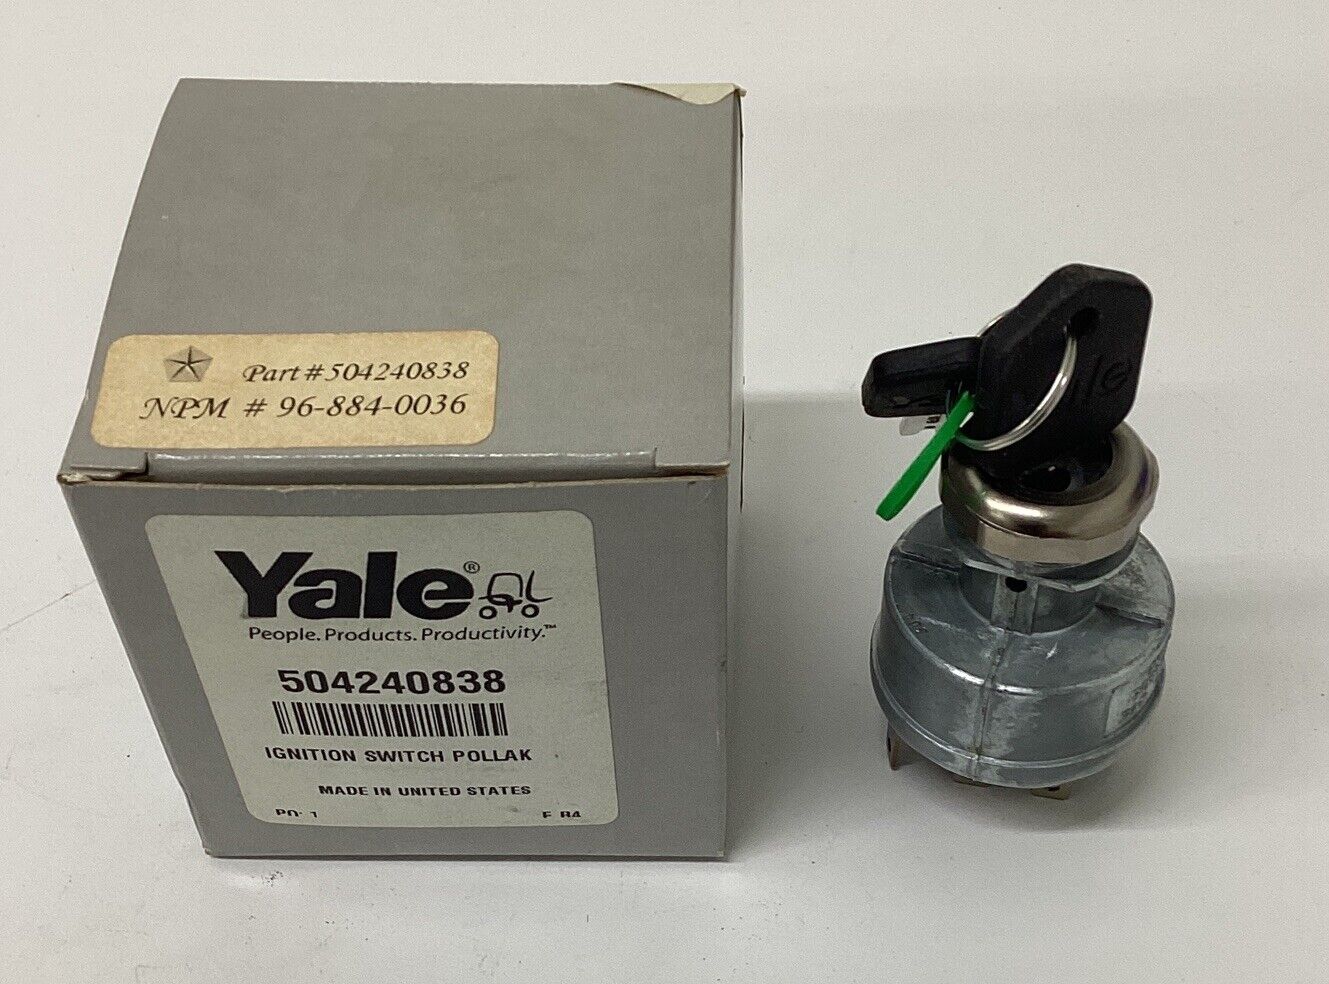 Yale Hyster 504240838 Pollak Ignition Switch (GR207) - 0